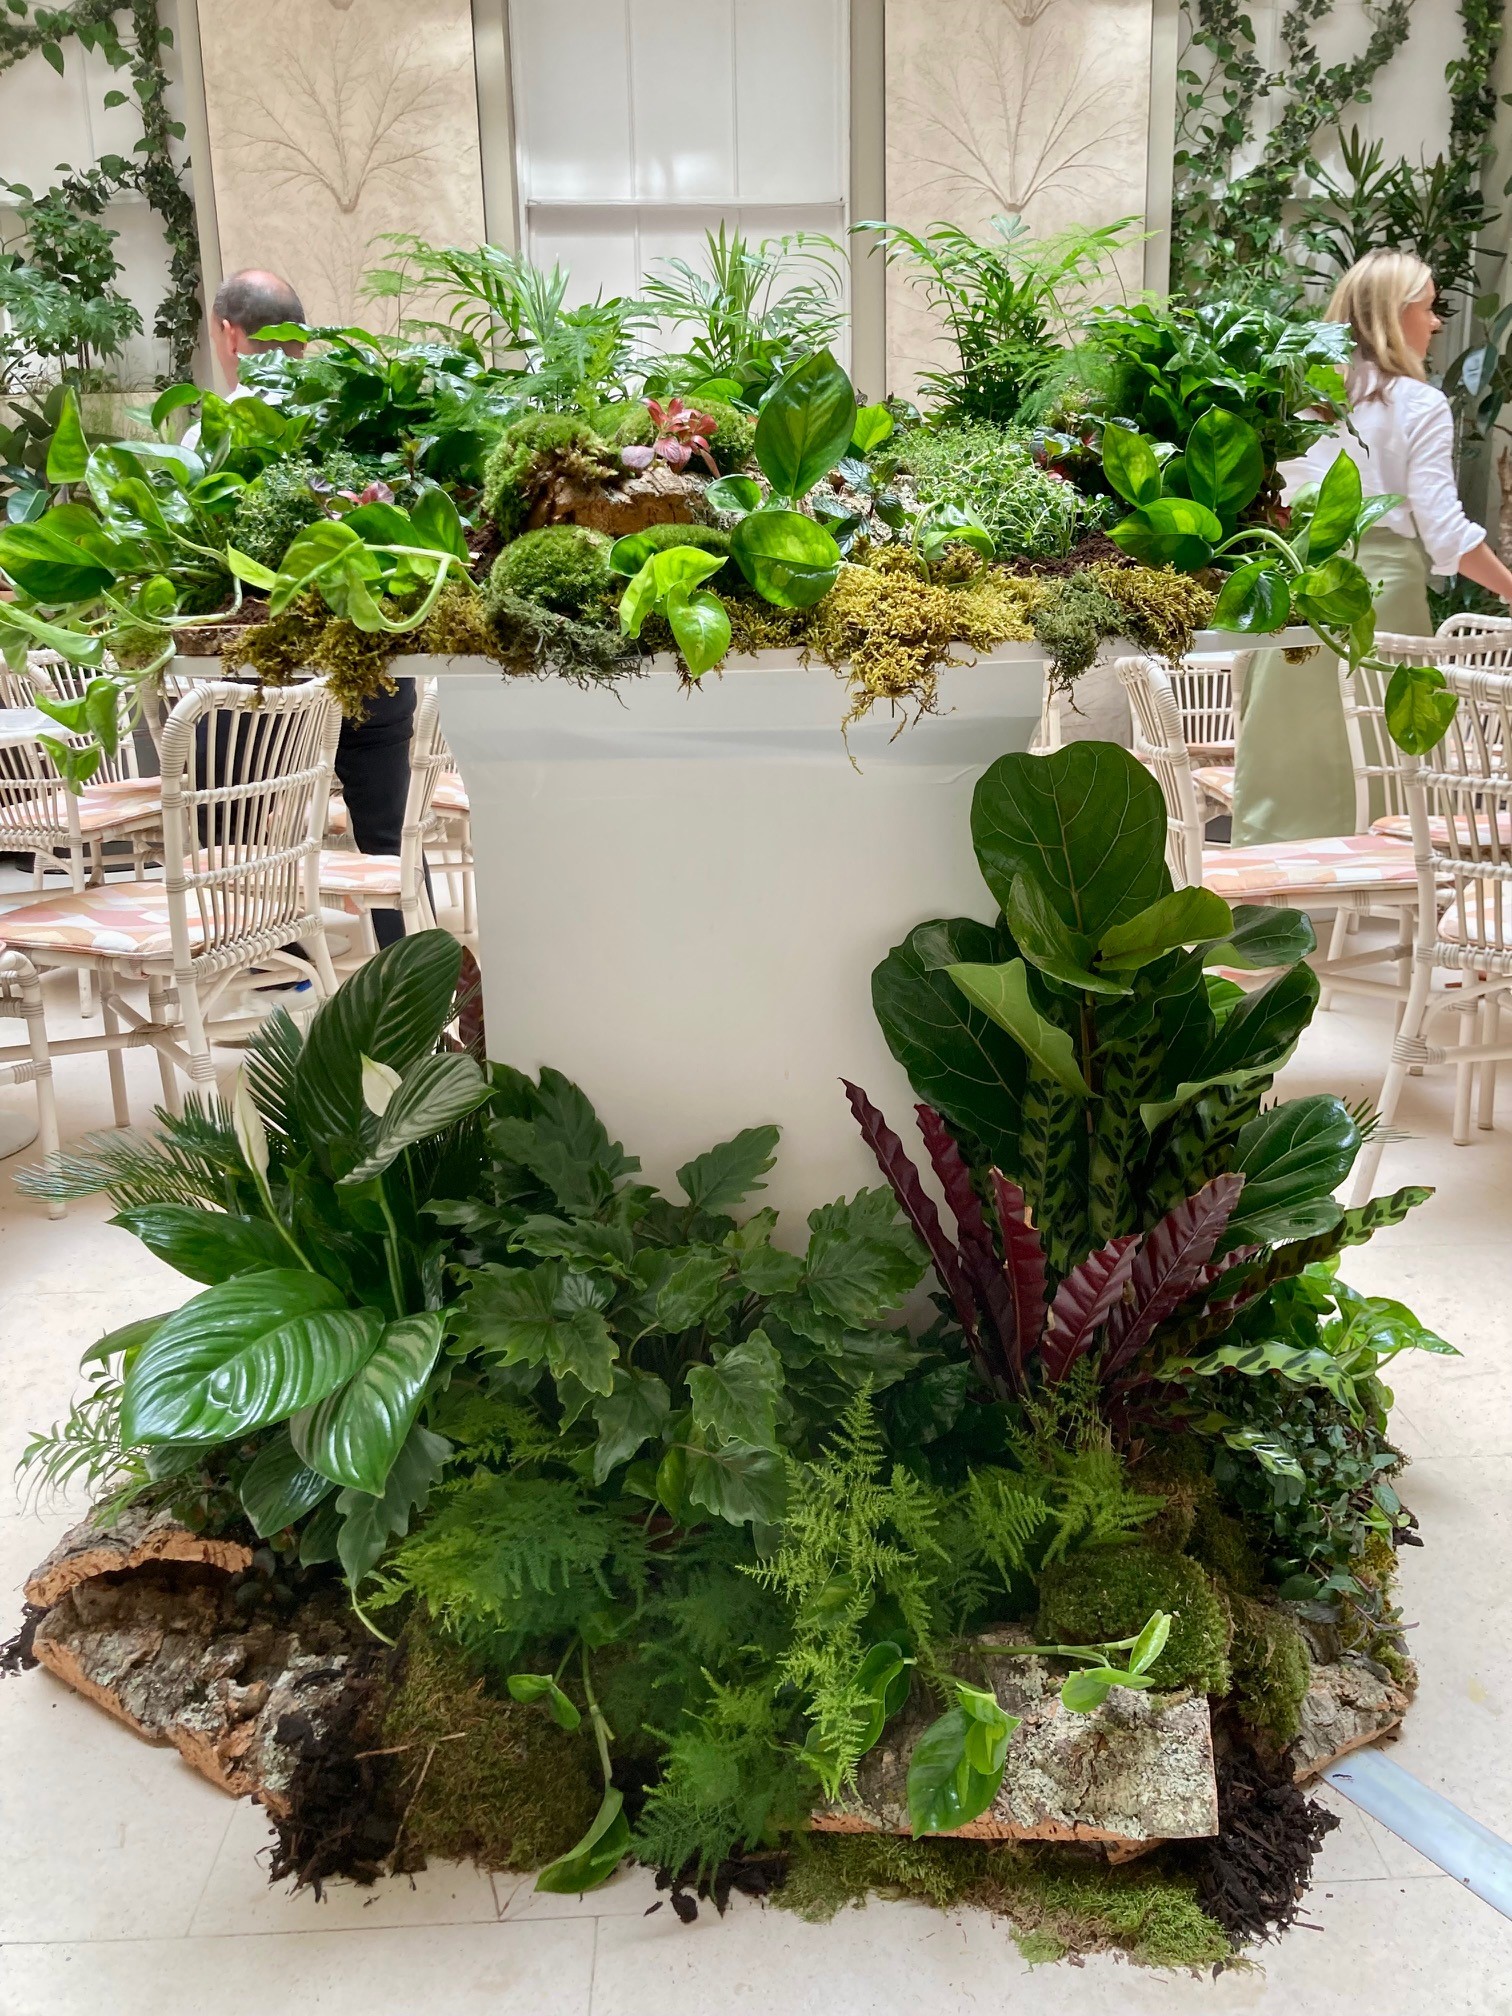 Live planting in a bright event space